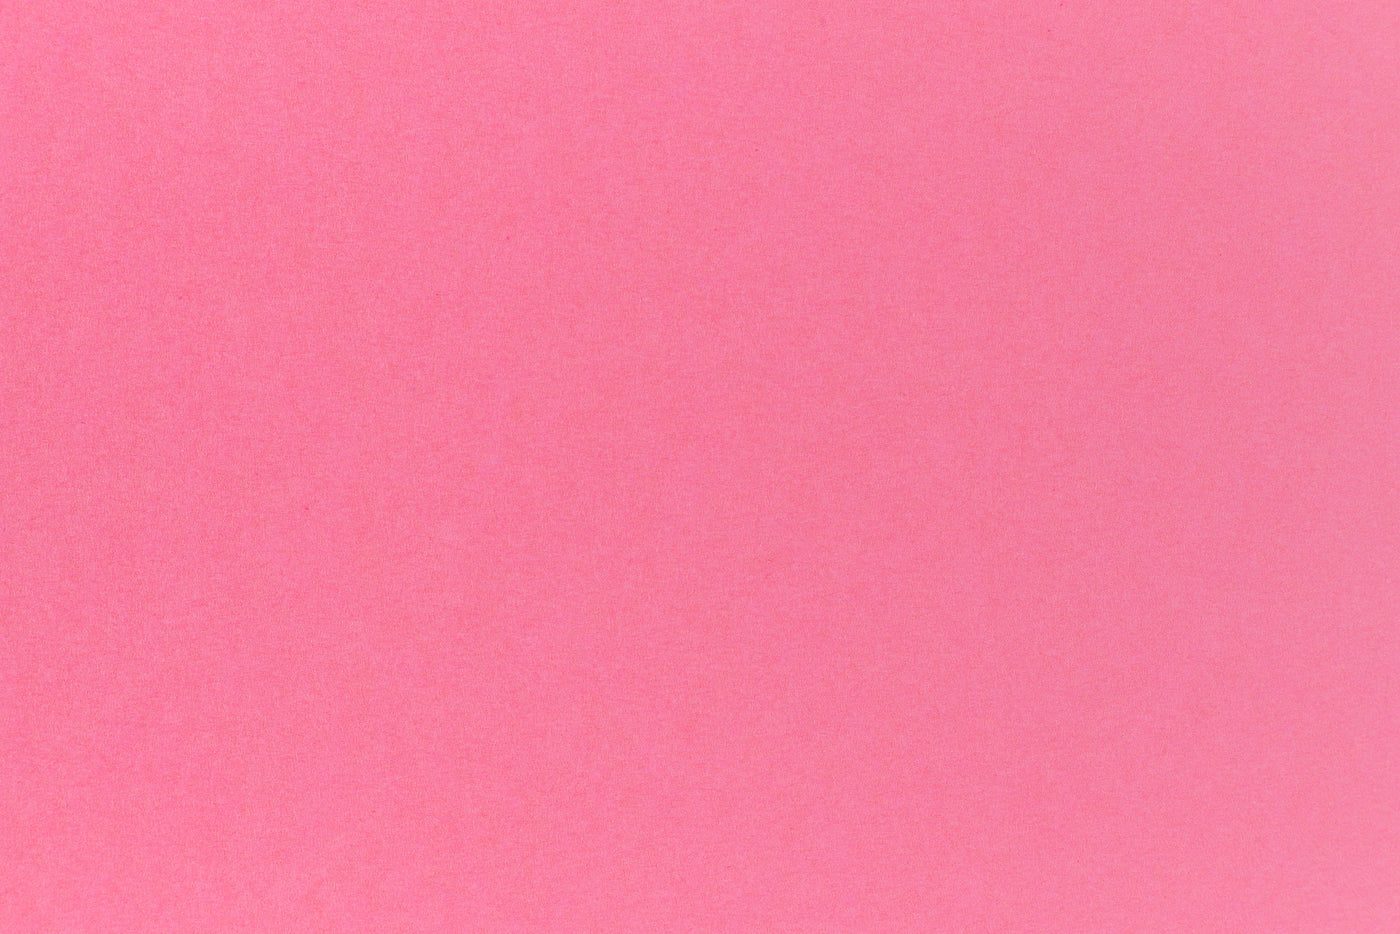 Shocking Pink Paper (Glo-Tone, Text Weight)